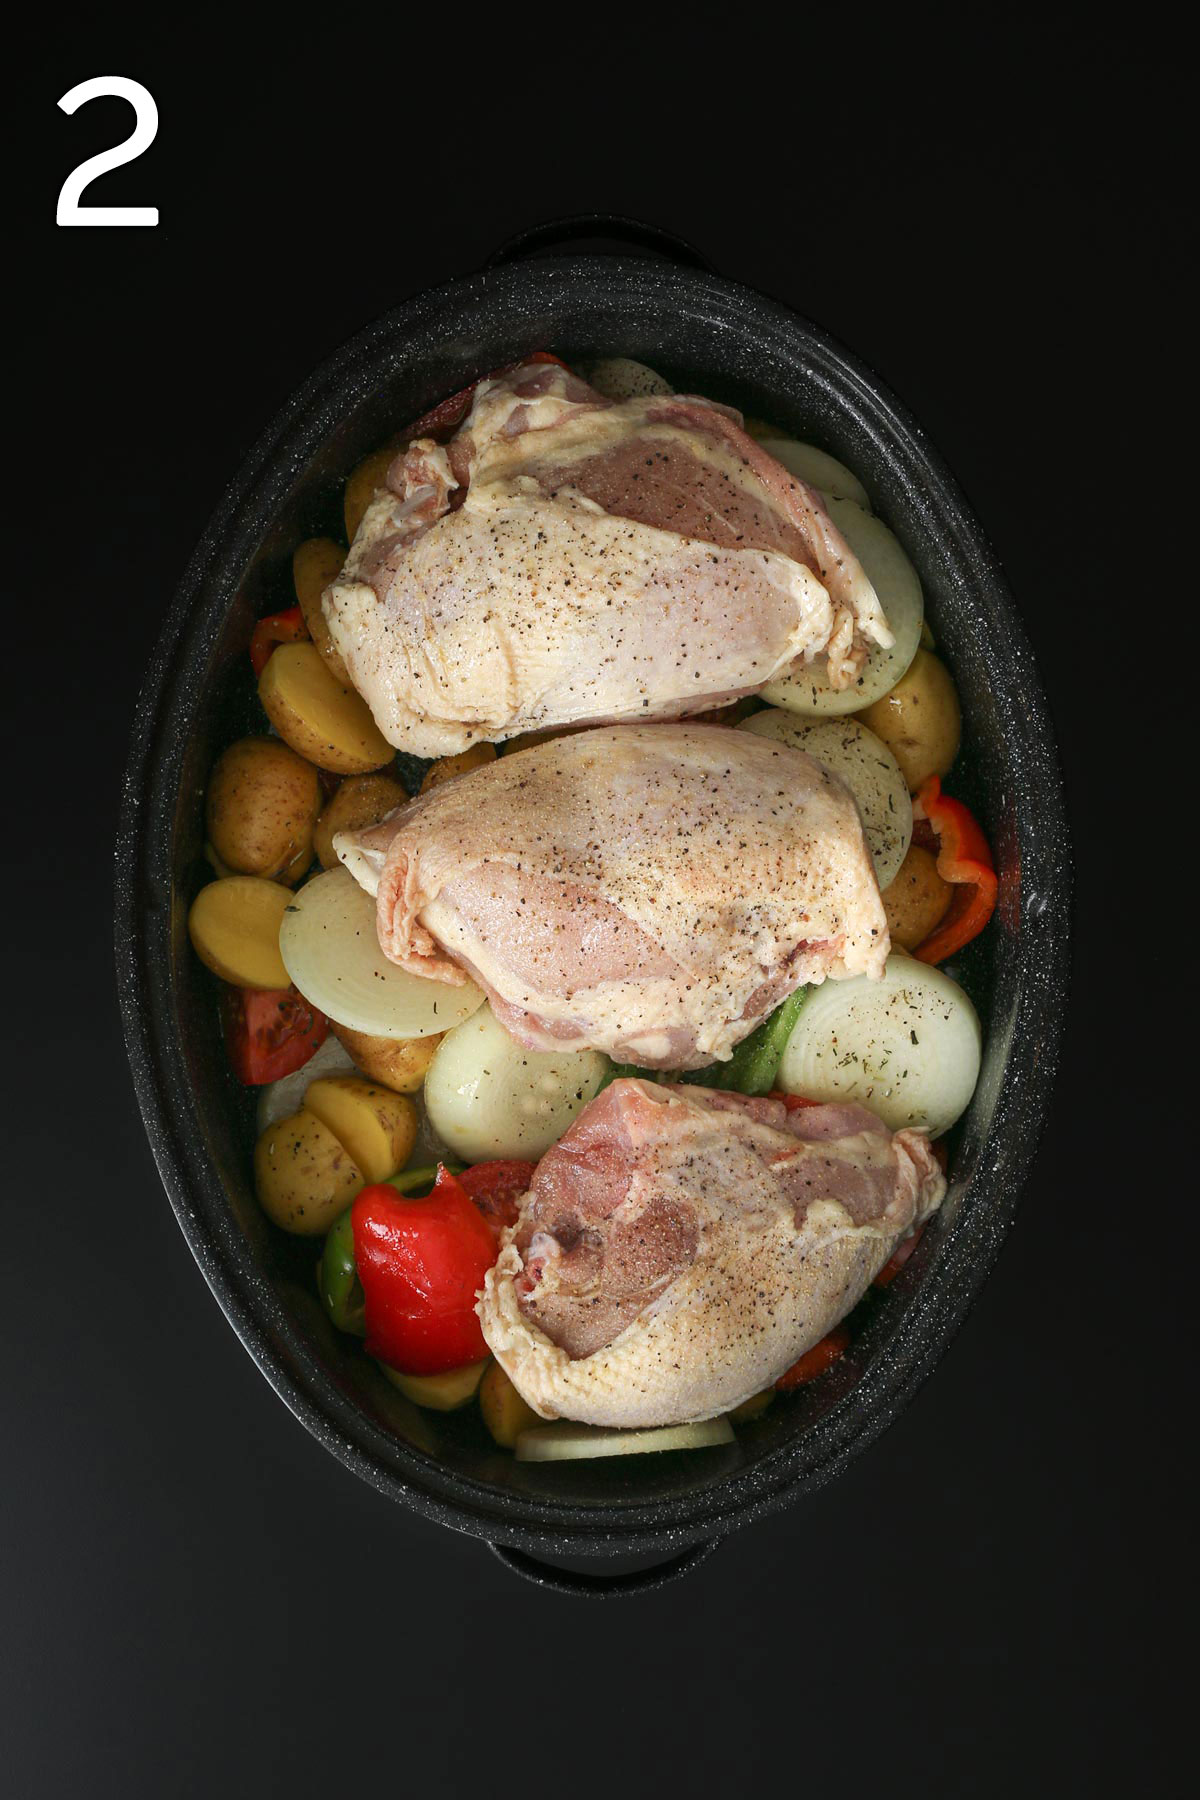 uncooked chicken pieces atop the vegetable mixture in the roasting pan on black table top.